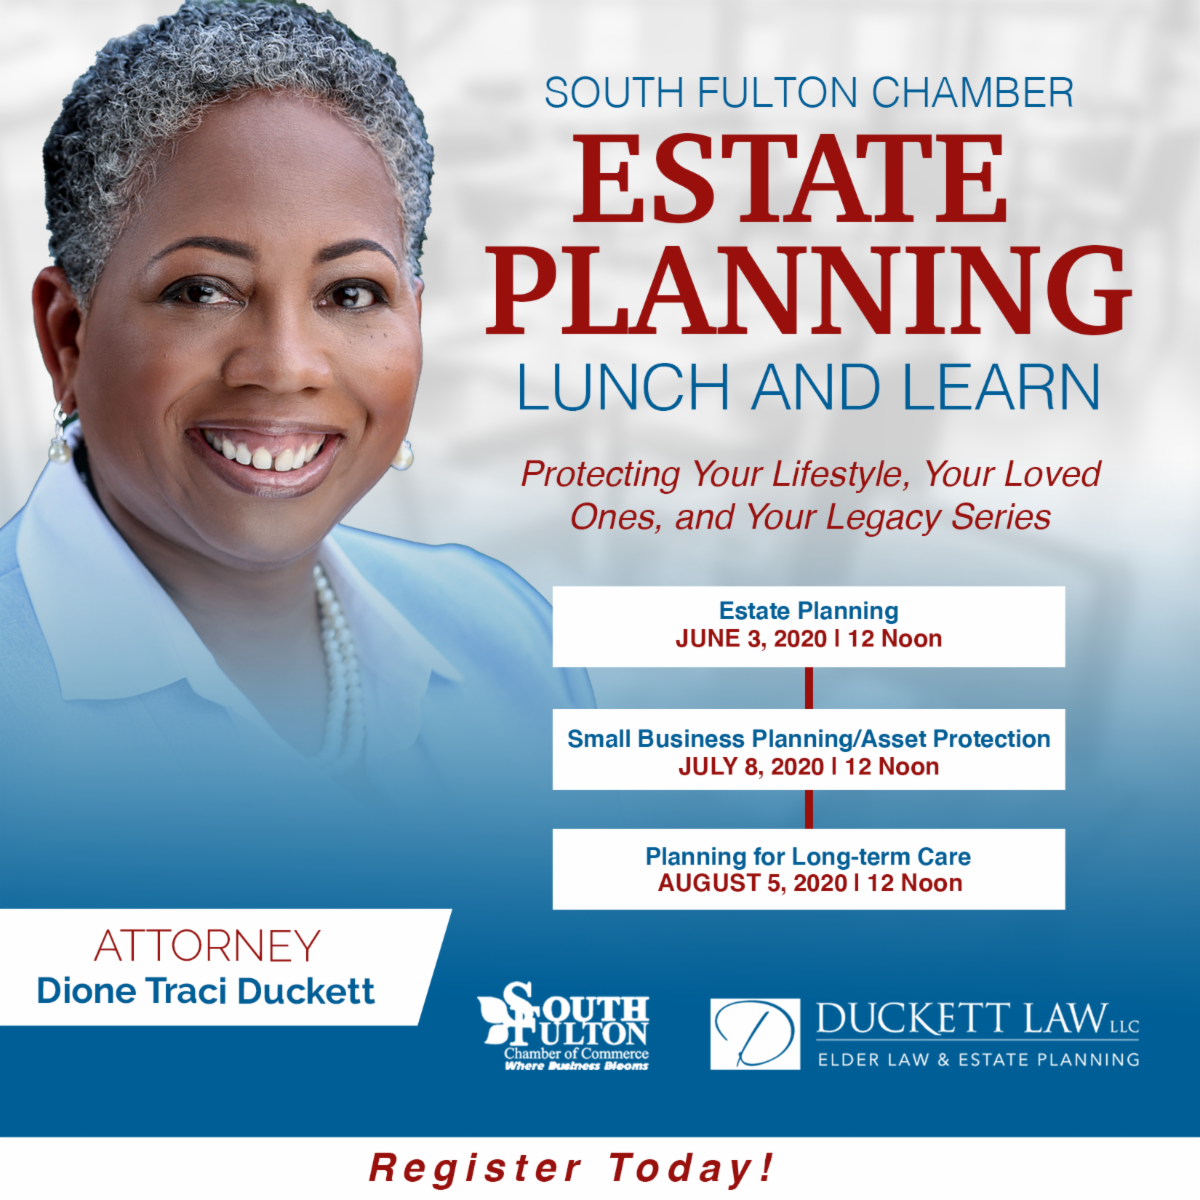 South Fulton Chamber Estate Planning Lunch and Learn